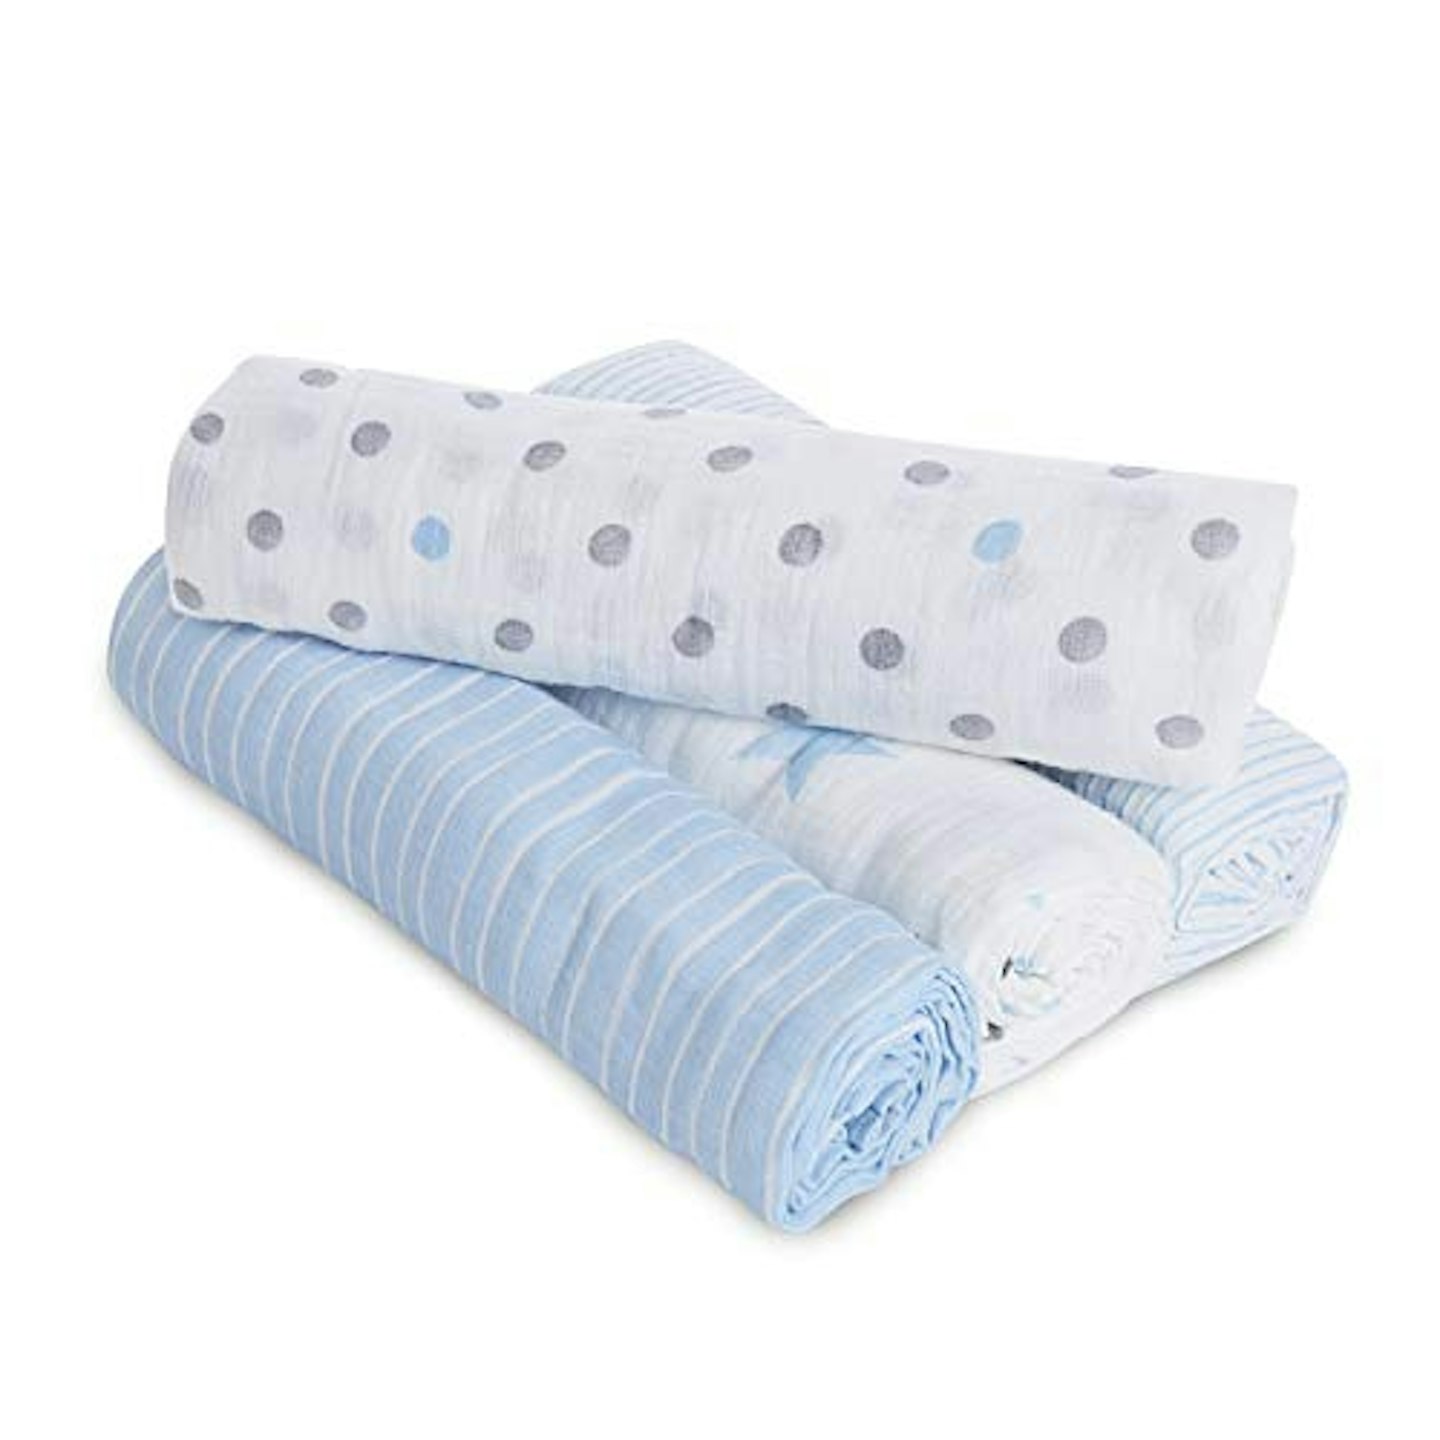 aden + anais swaddle (pack of 4)